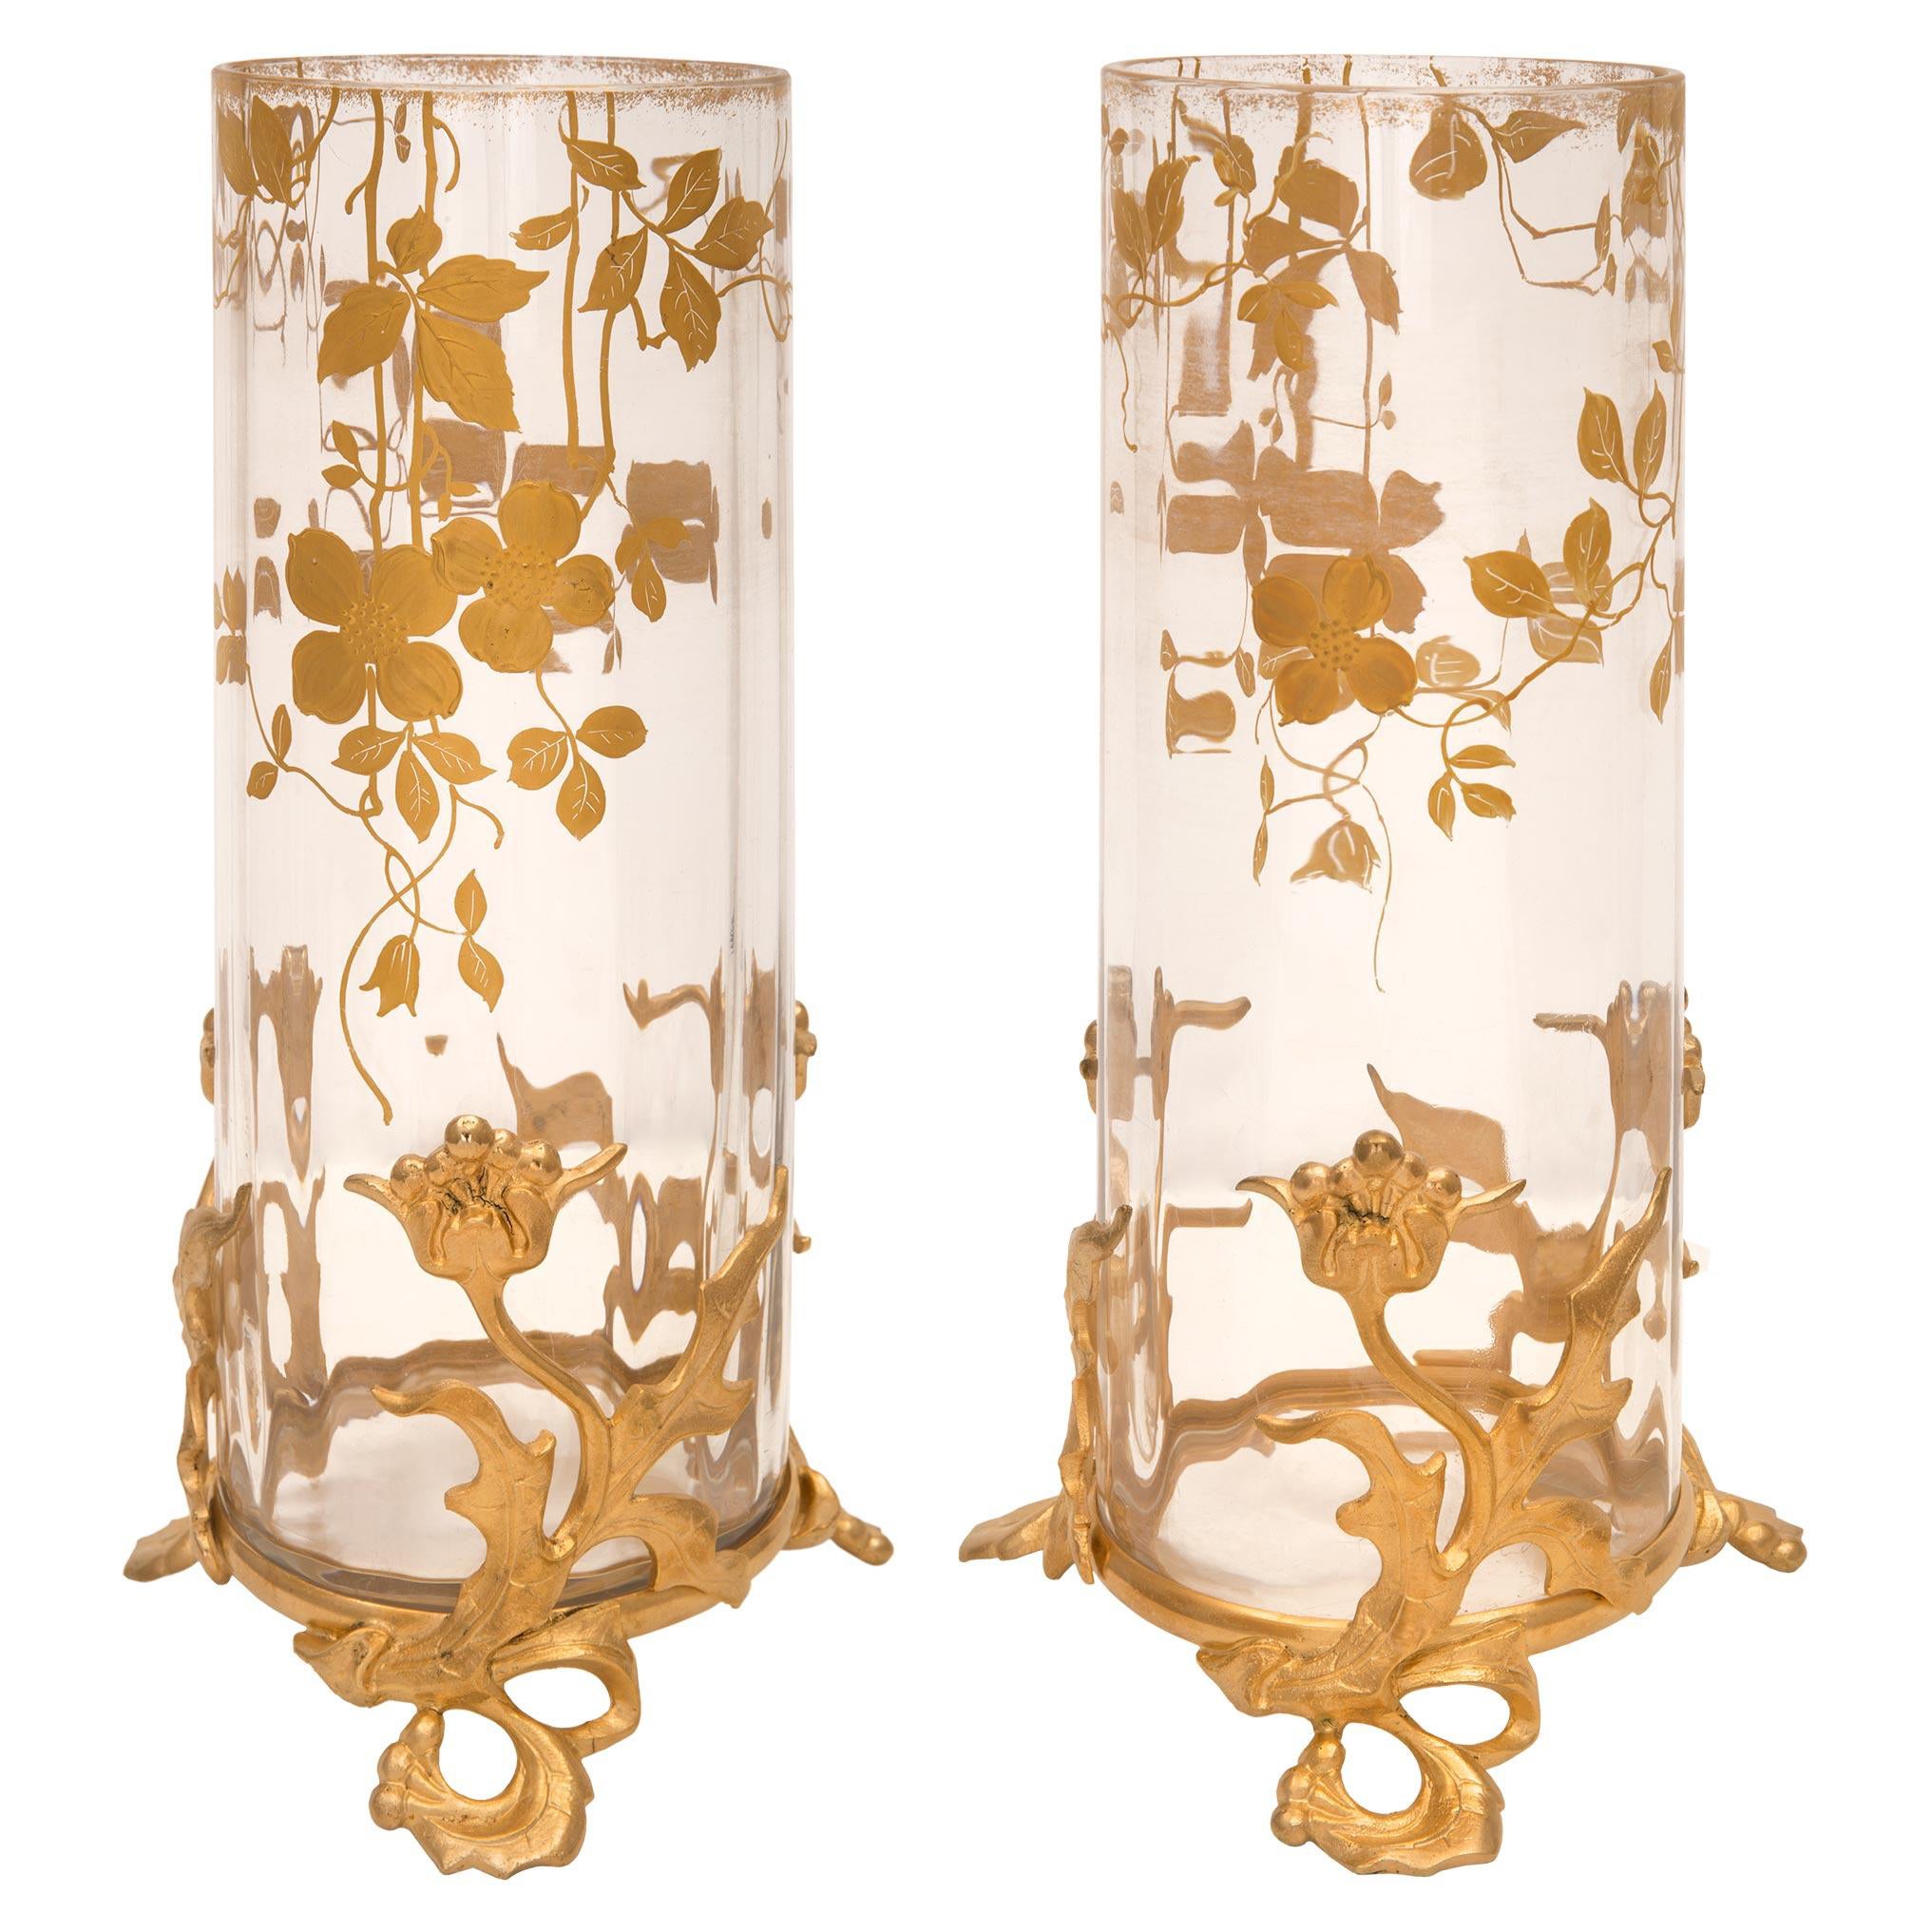 Pair of French Turn of the Century Art Nouveau Period Baccarat Vases For Sale